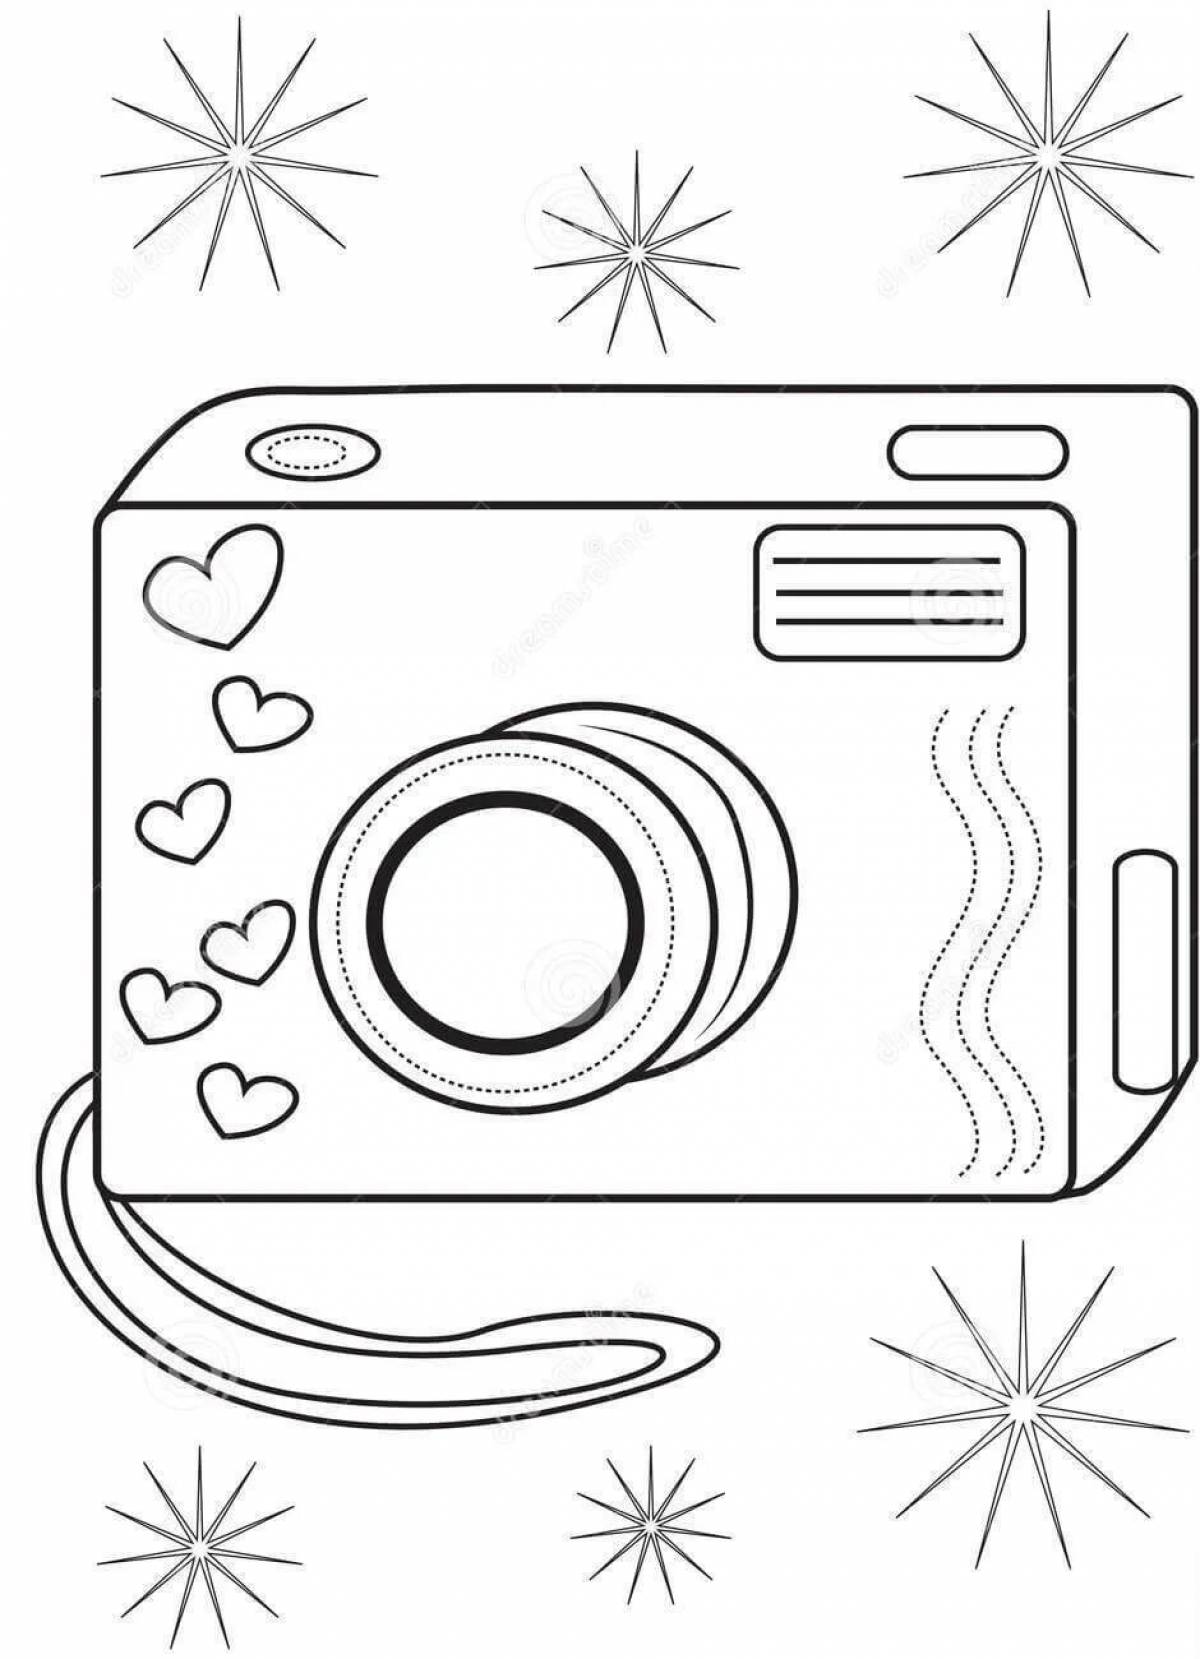 Colored Blast Chamber Coloring Pages for Toddlers